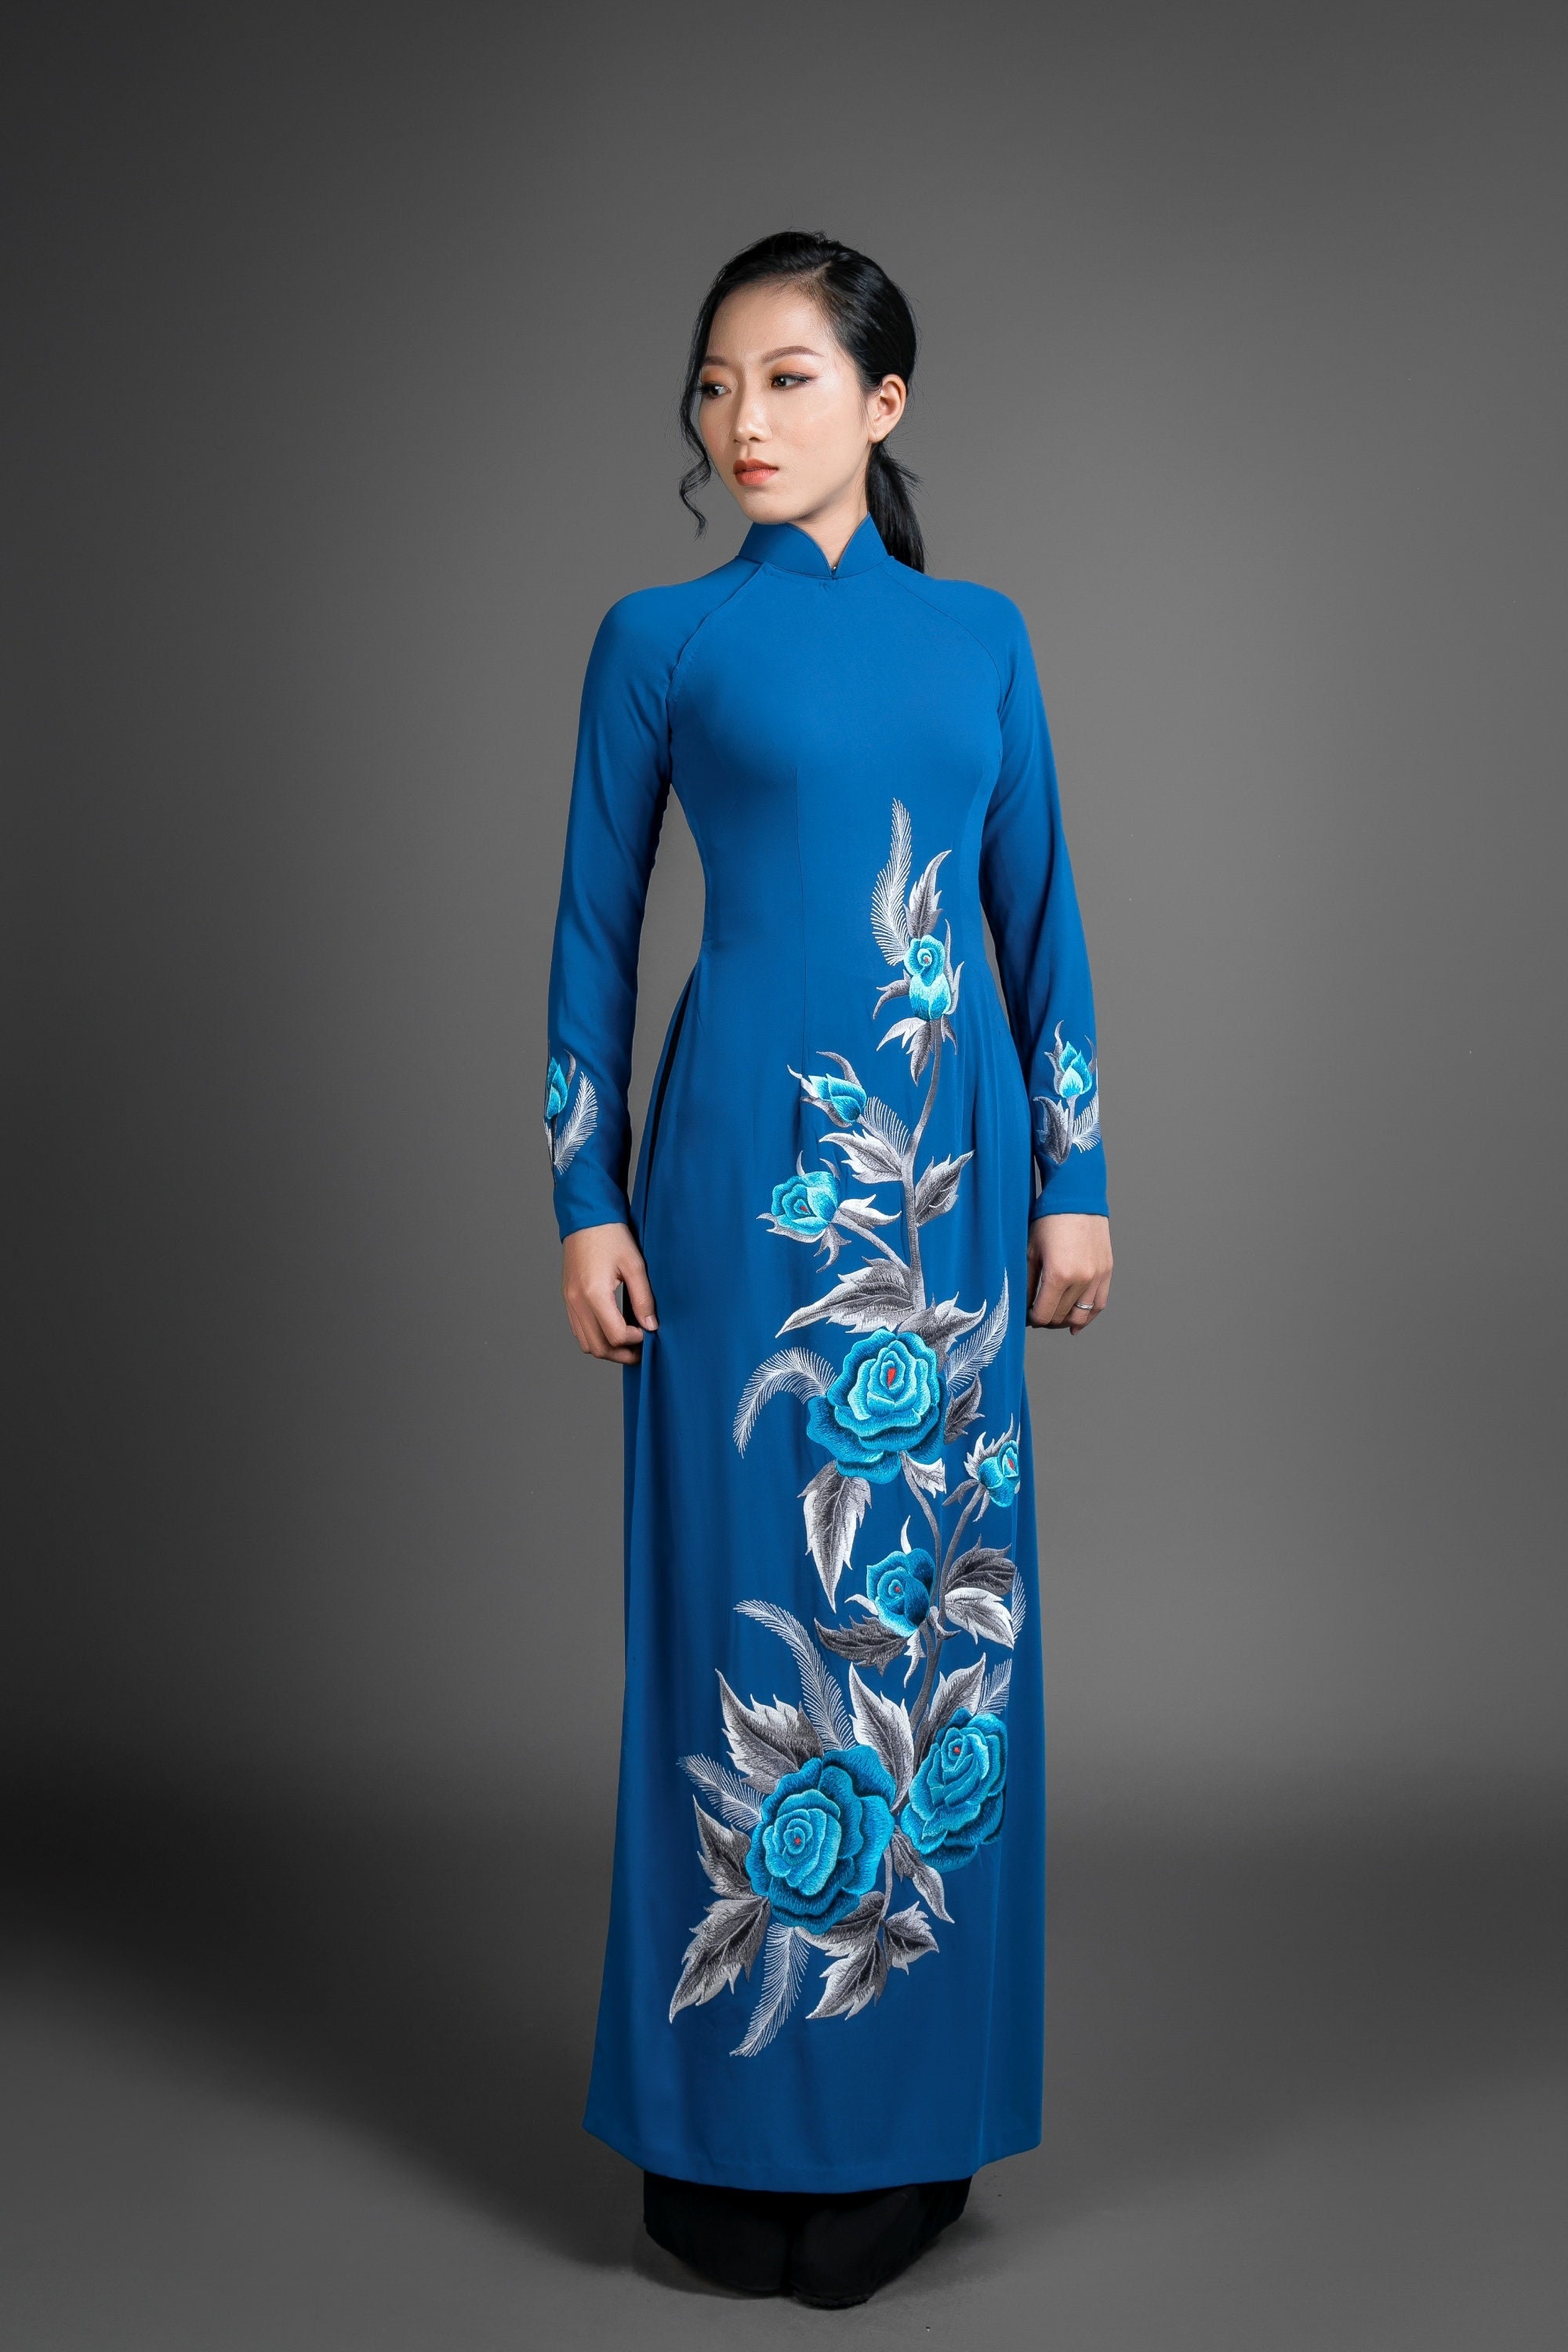 Ao Dai Vietnam Traditional Dress Blue Silk Long Dress With Stunning Embroidered Rose Motif Etsy 